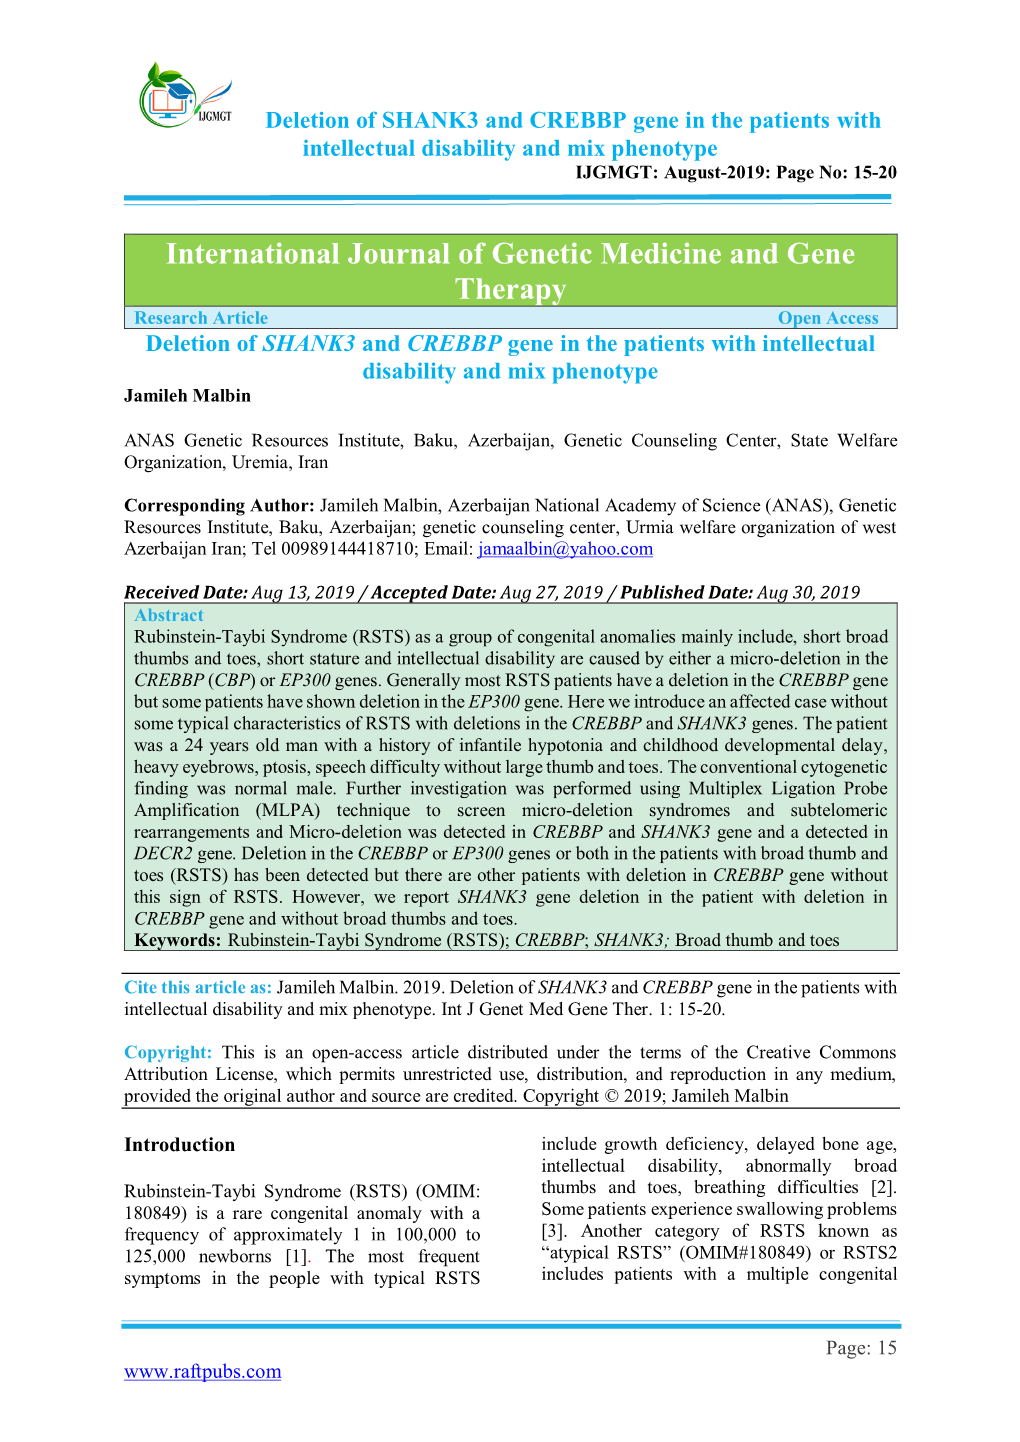 International Journal of Genetic Medicine and Gene Therapy